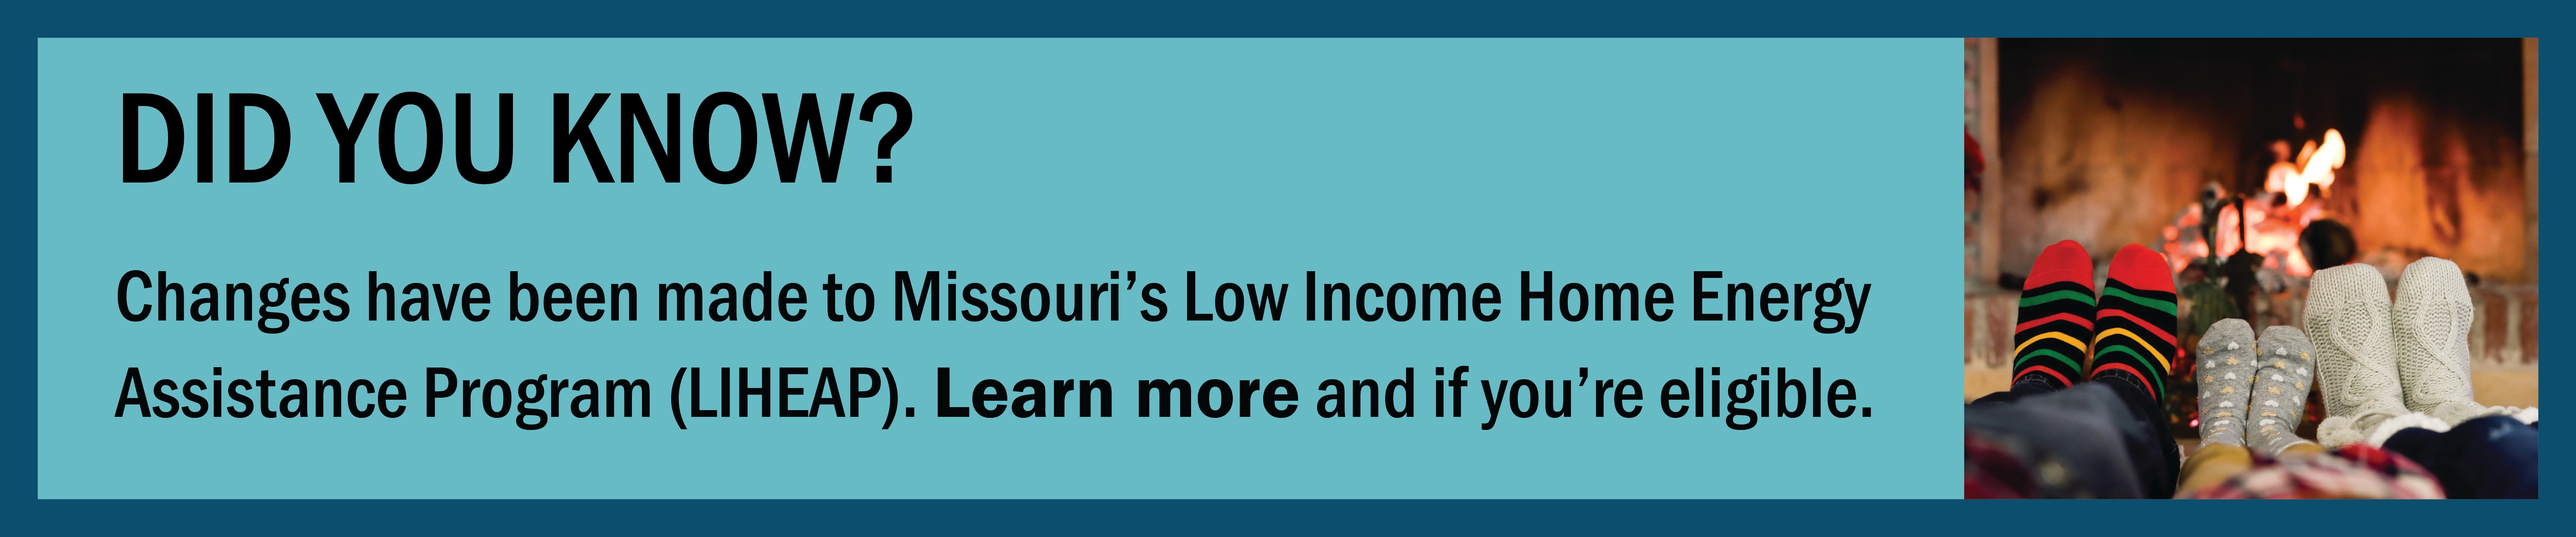 Changes have been made to Missouri's Low Income Home Energy Assistance Program. Learn and if you're eligible